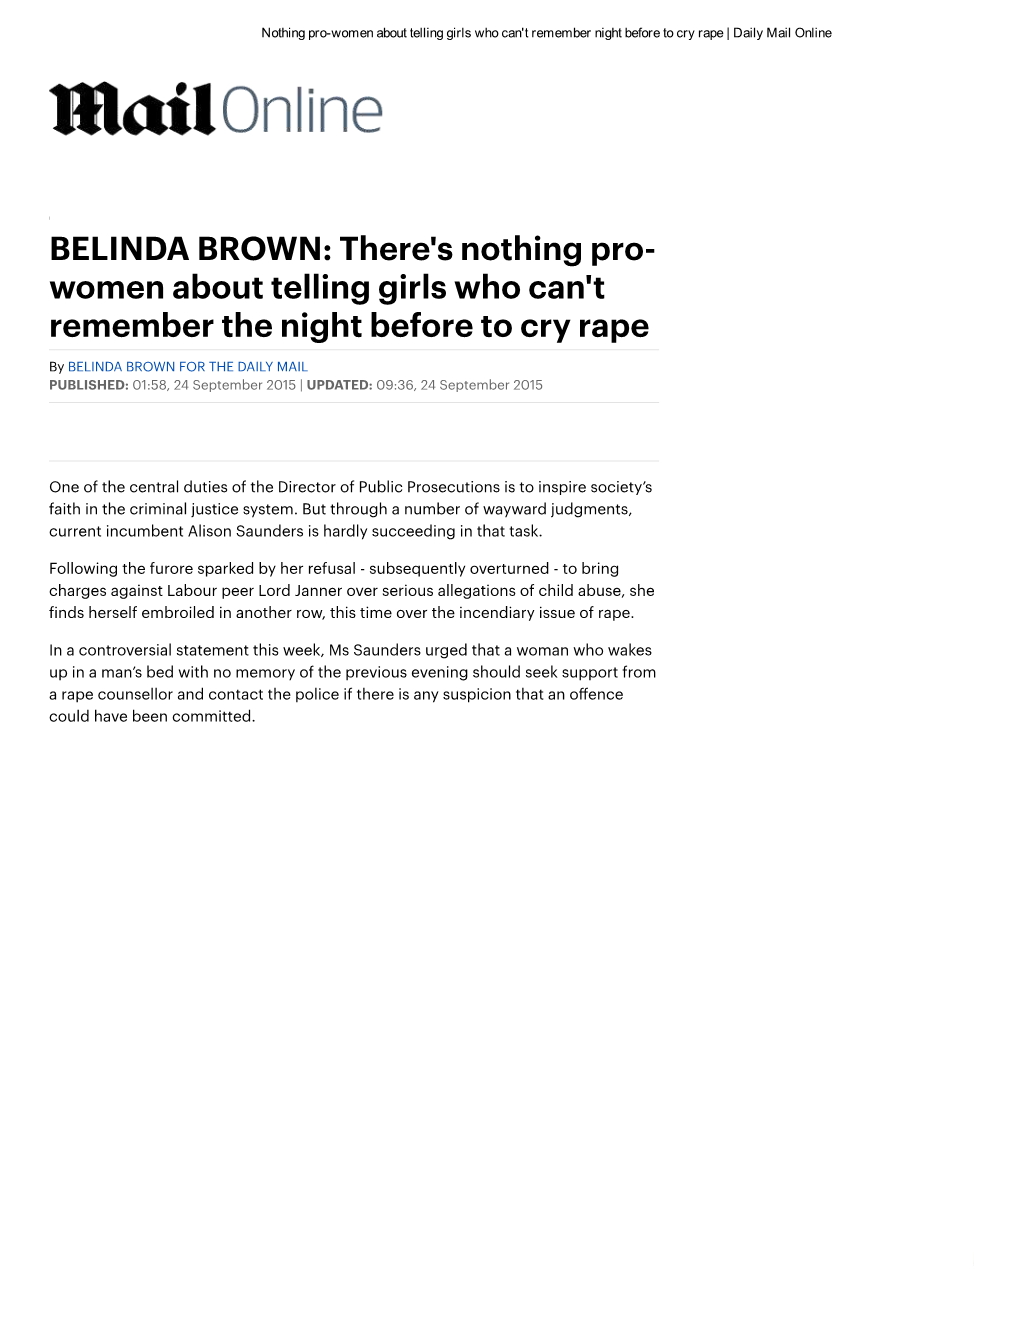 BELINDA BROWN: There's Nothing Pro- Women About Telling Girls Who Can't Remember the Night Before to Cry Rape